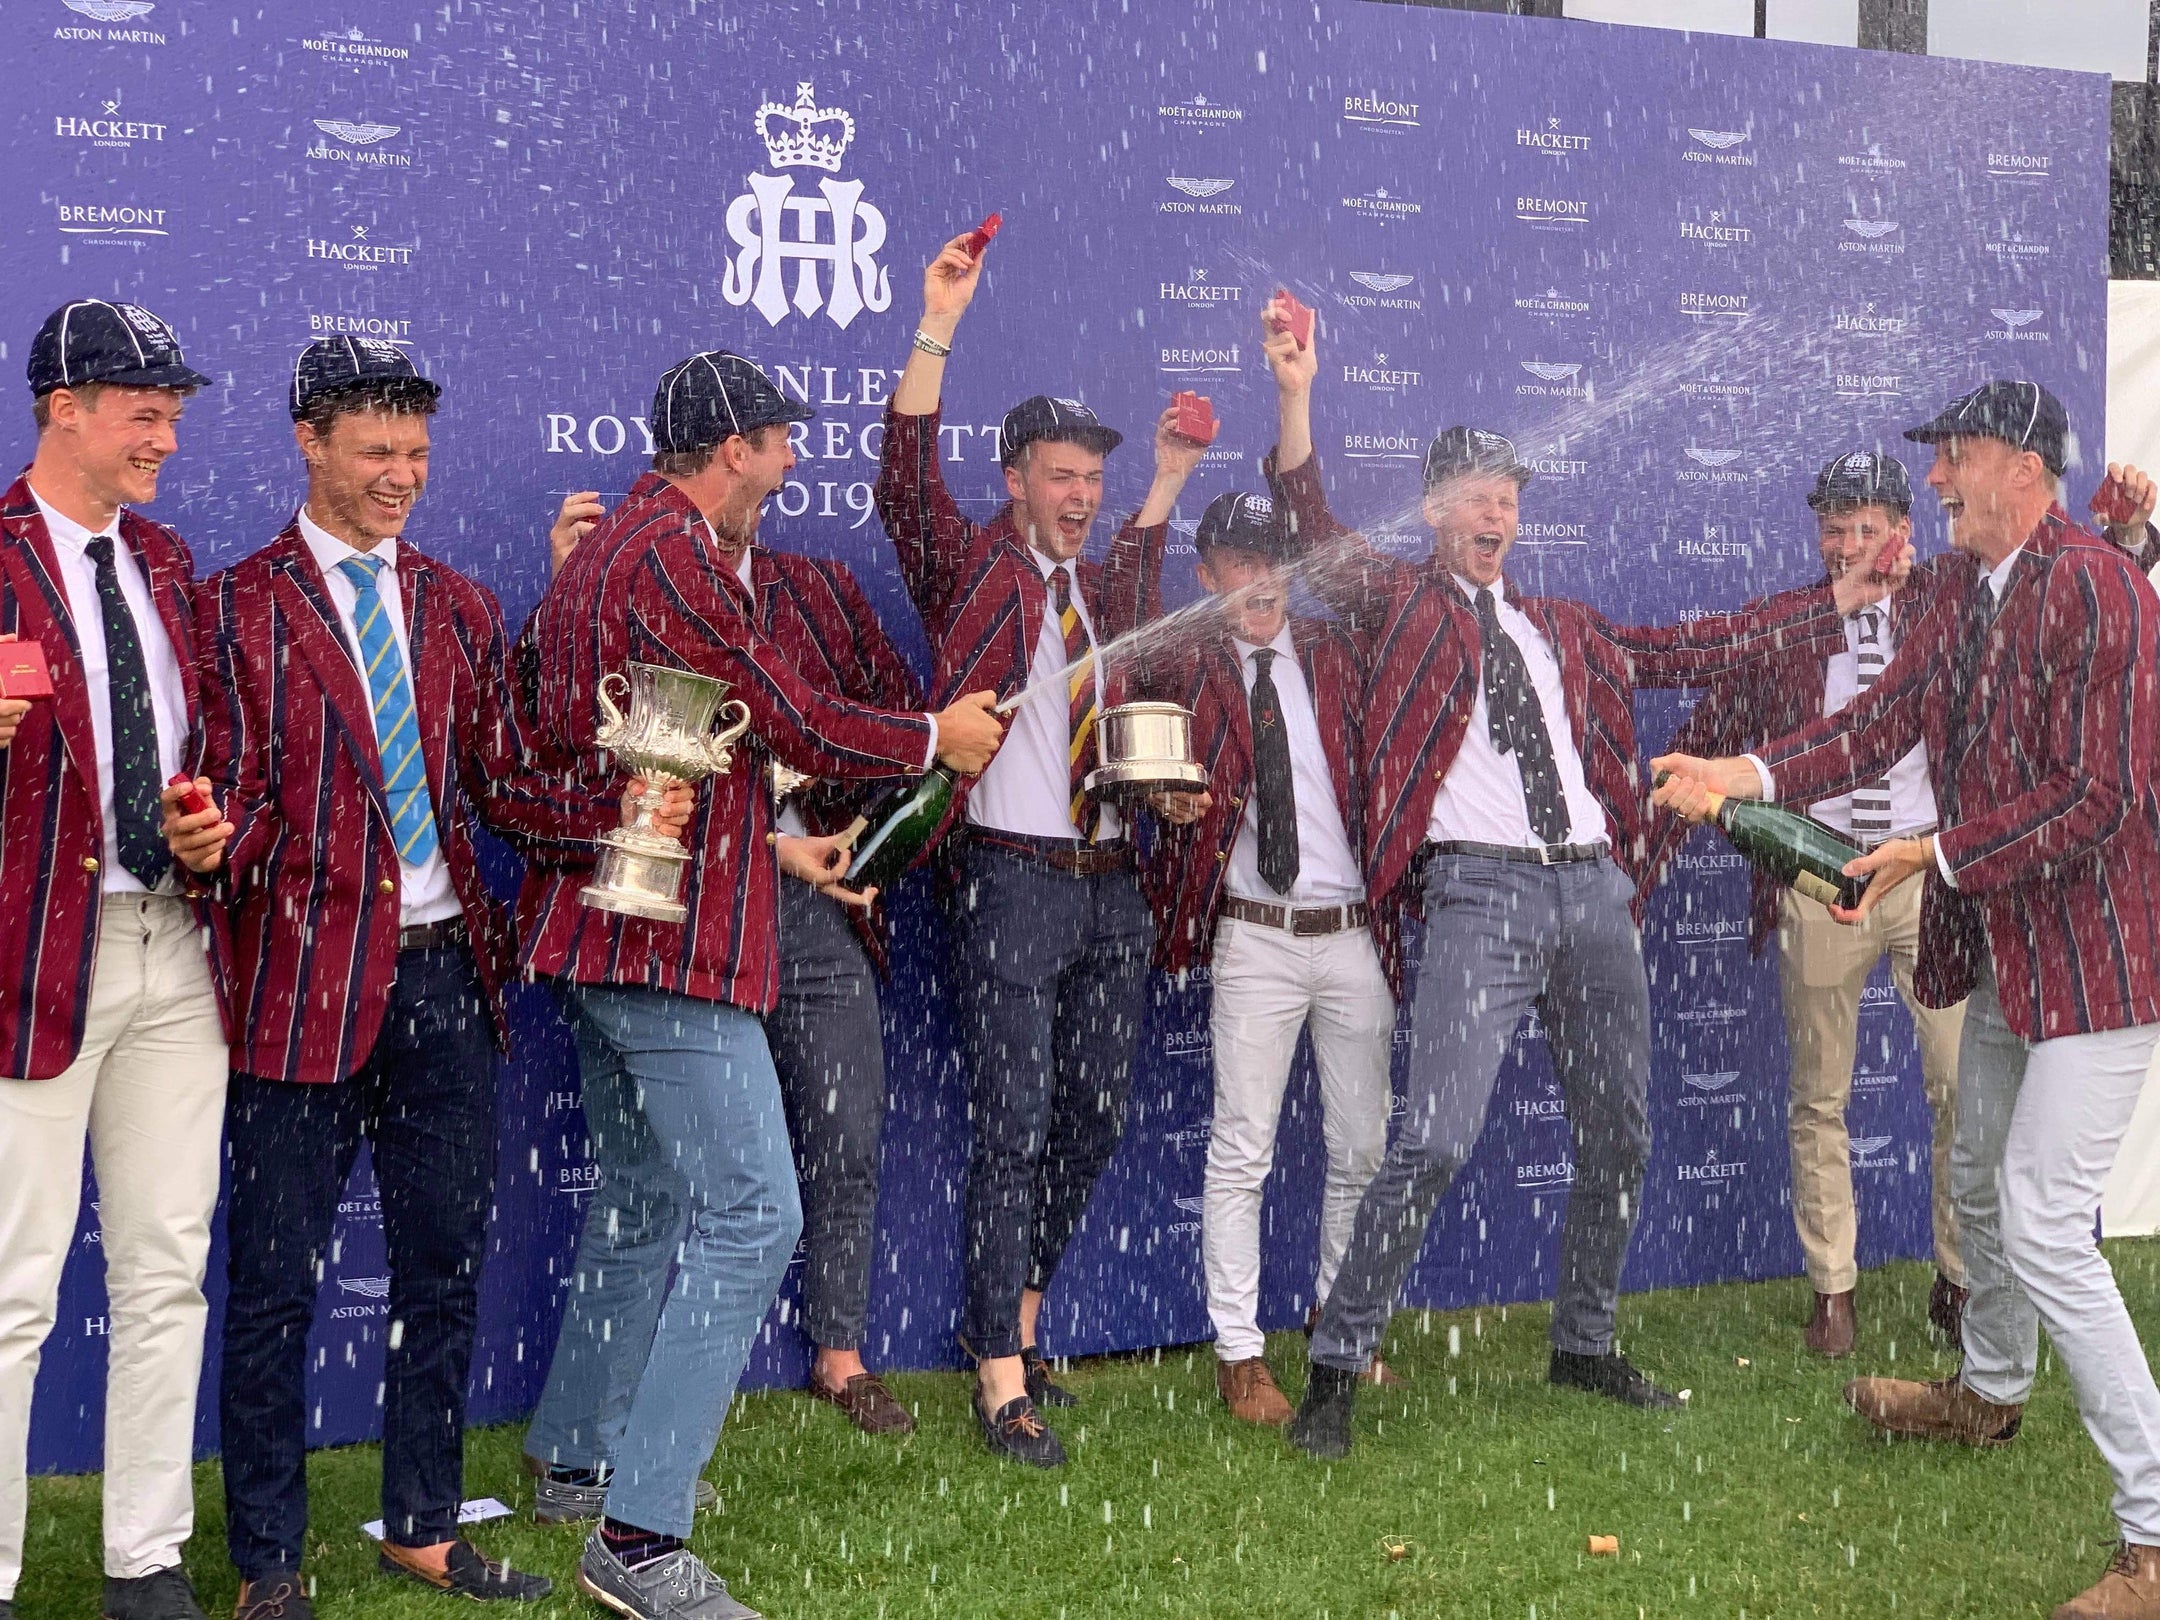 Henley Royal Regatta 2019 (Rowing Blazers is proud to sponsor many of the winning teams at this years Henley Royal Regatta)